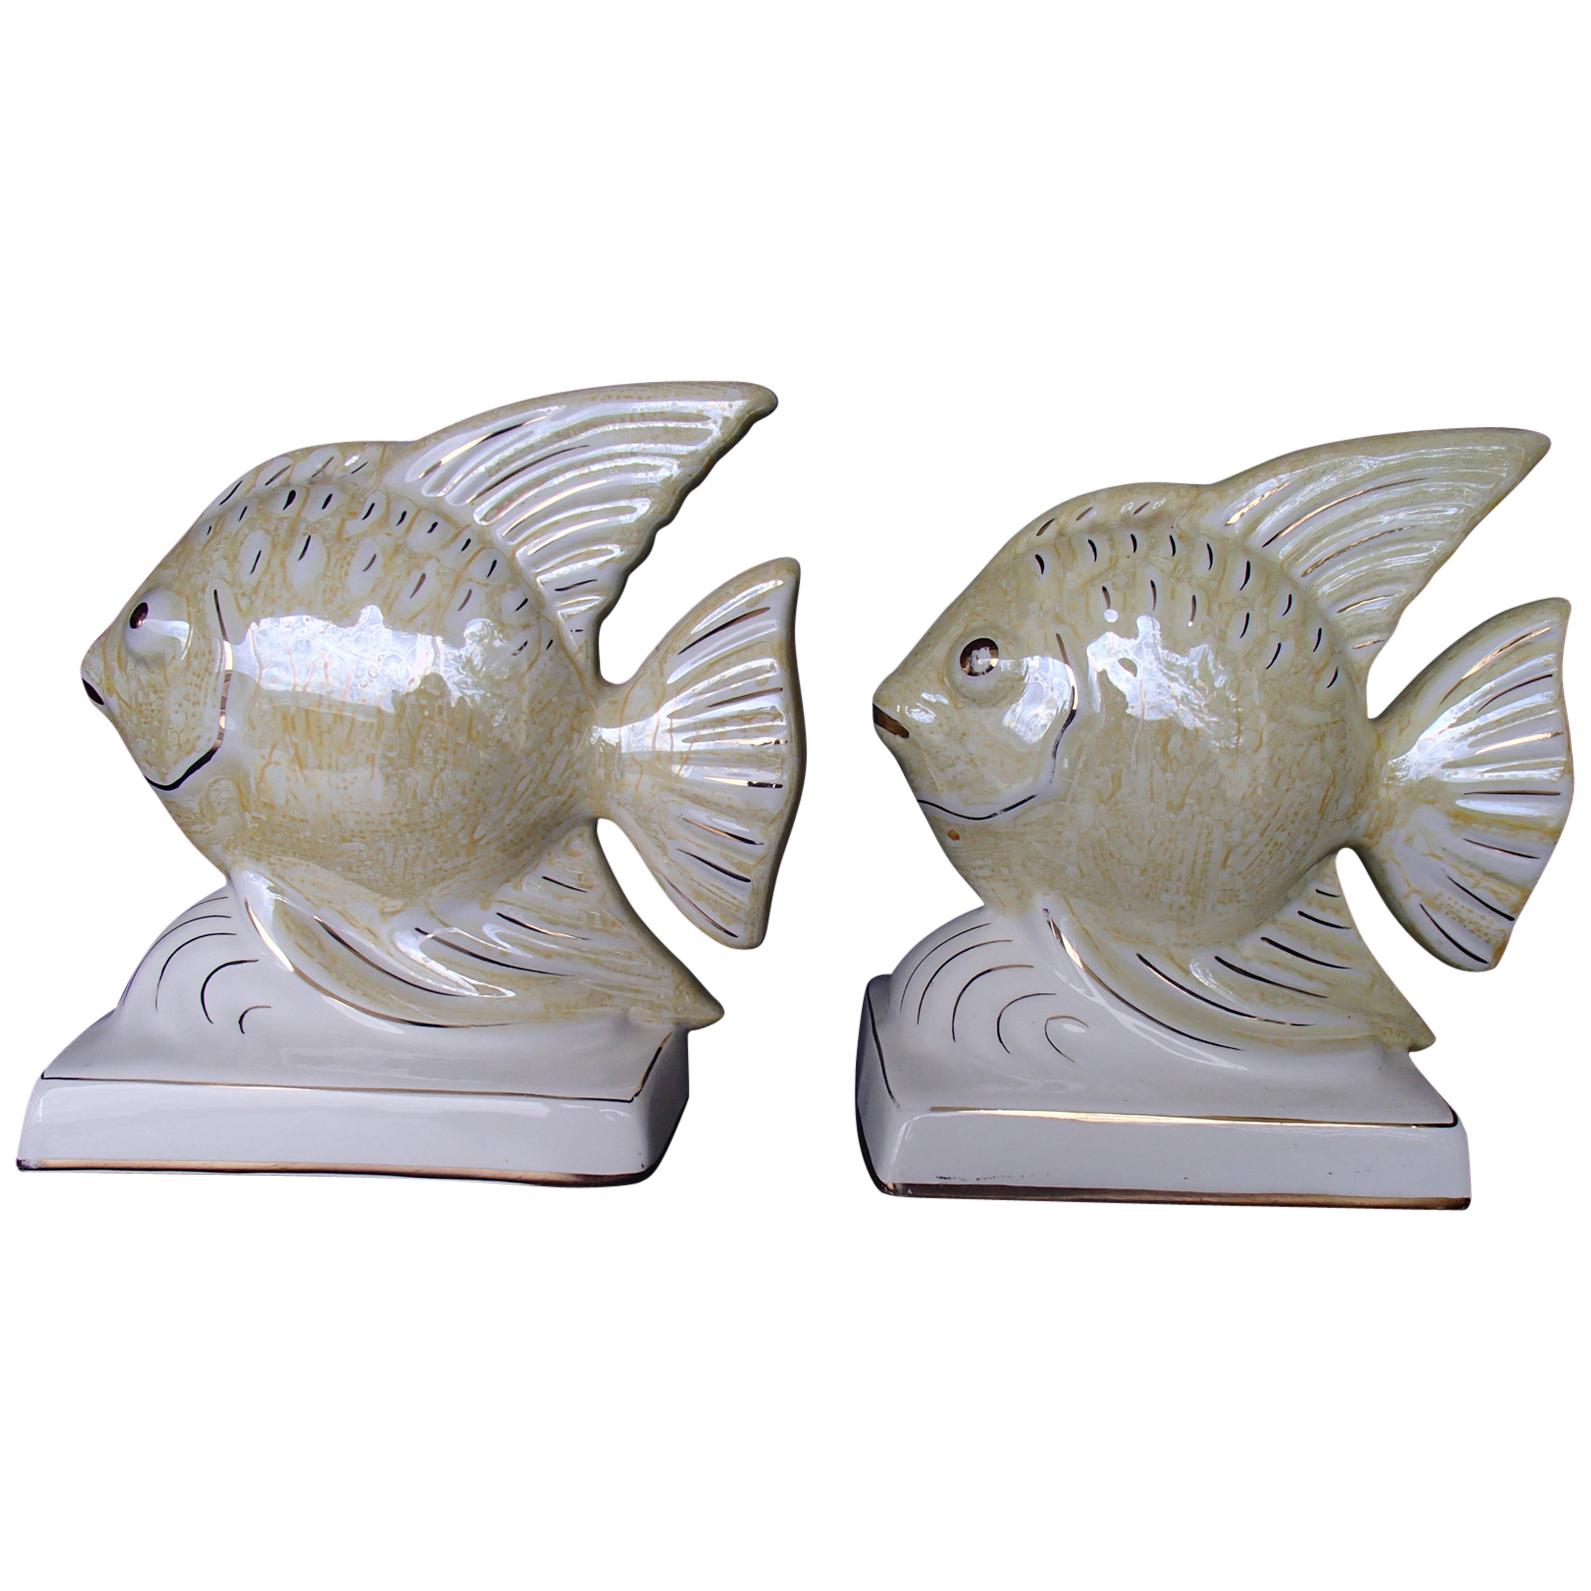 1950s Pair of Porcelaine Fishes as Bookend or Deco